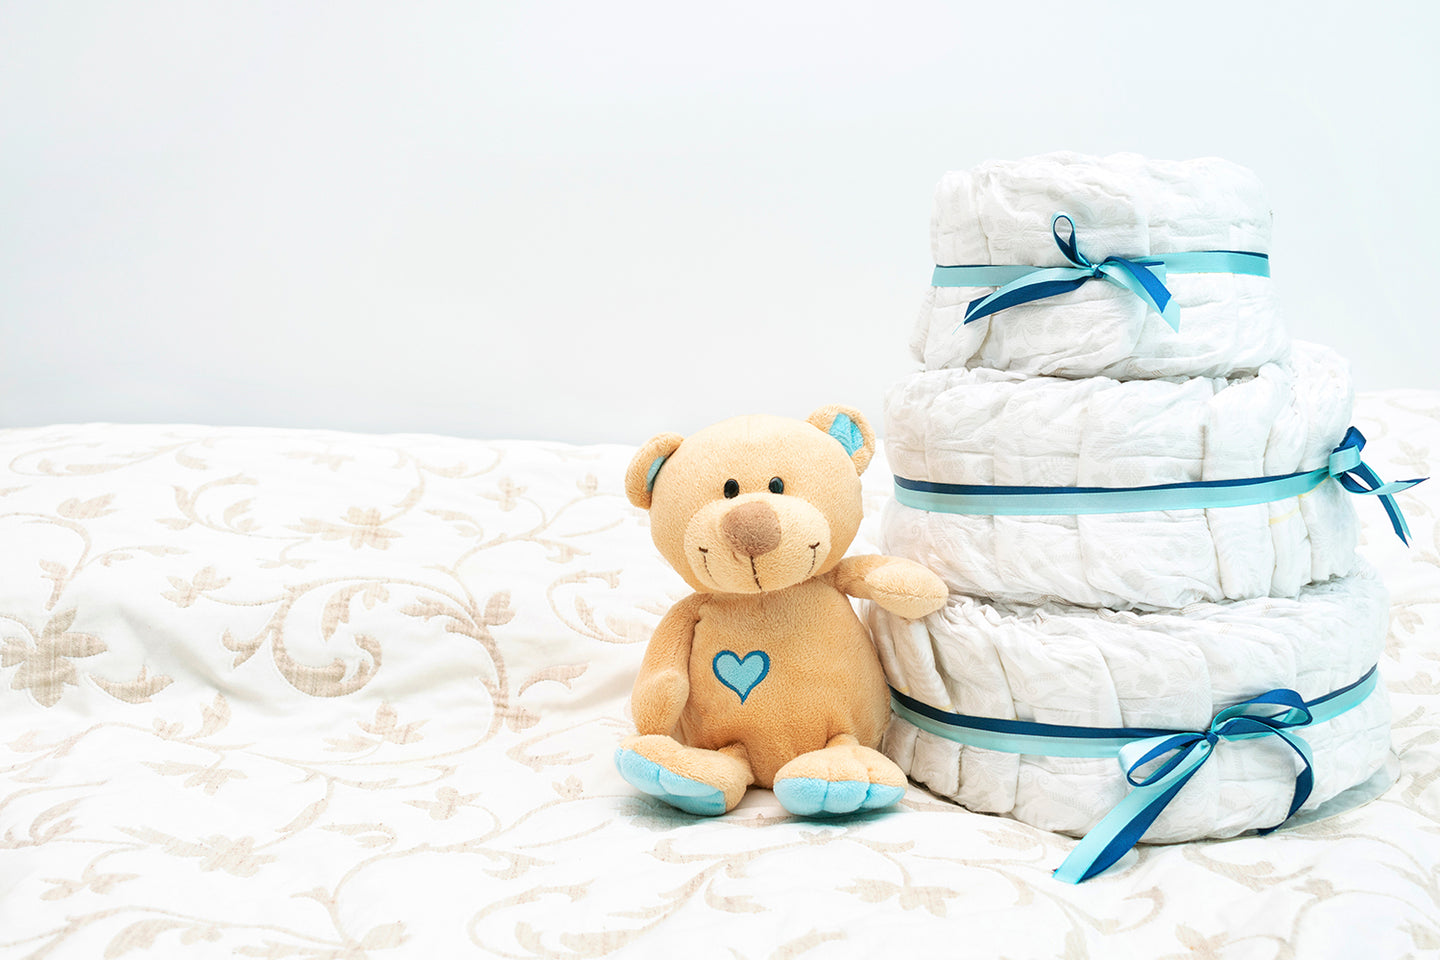 What Is A Diaper Cake?